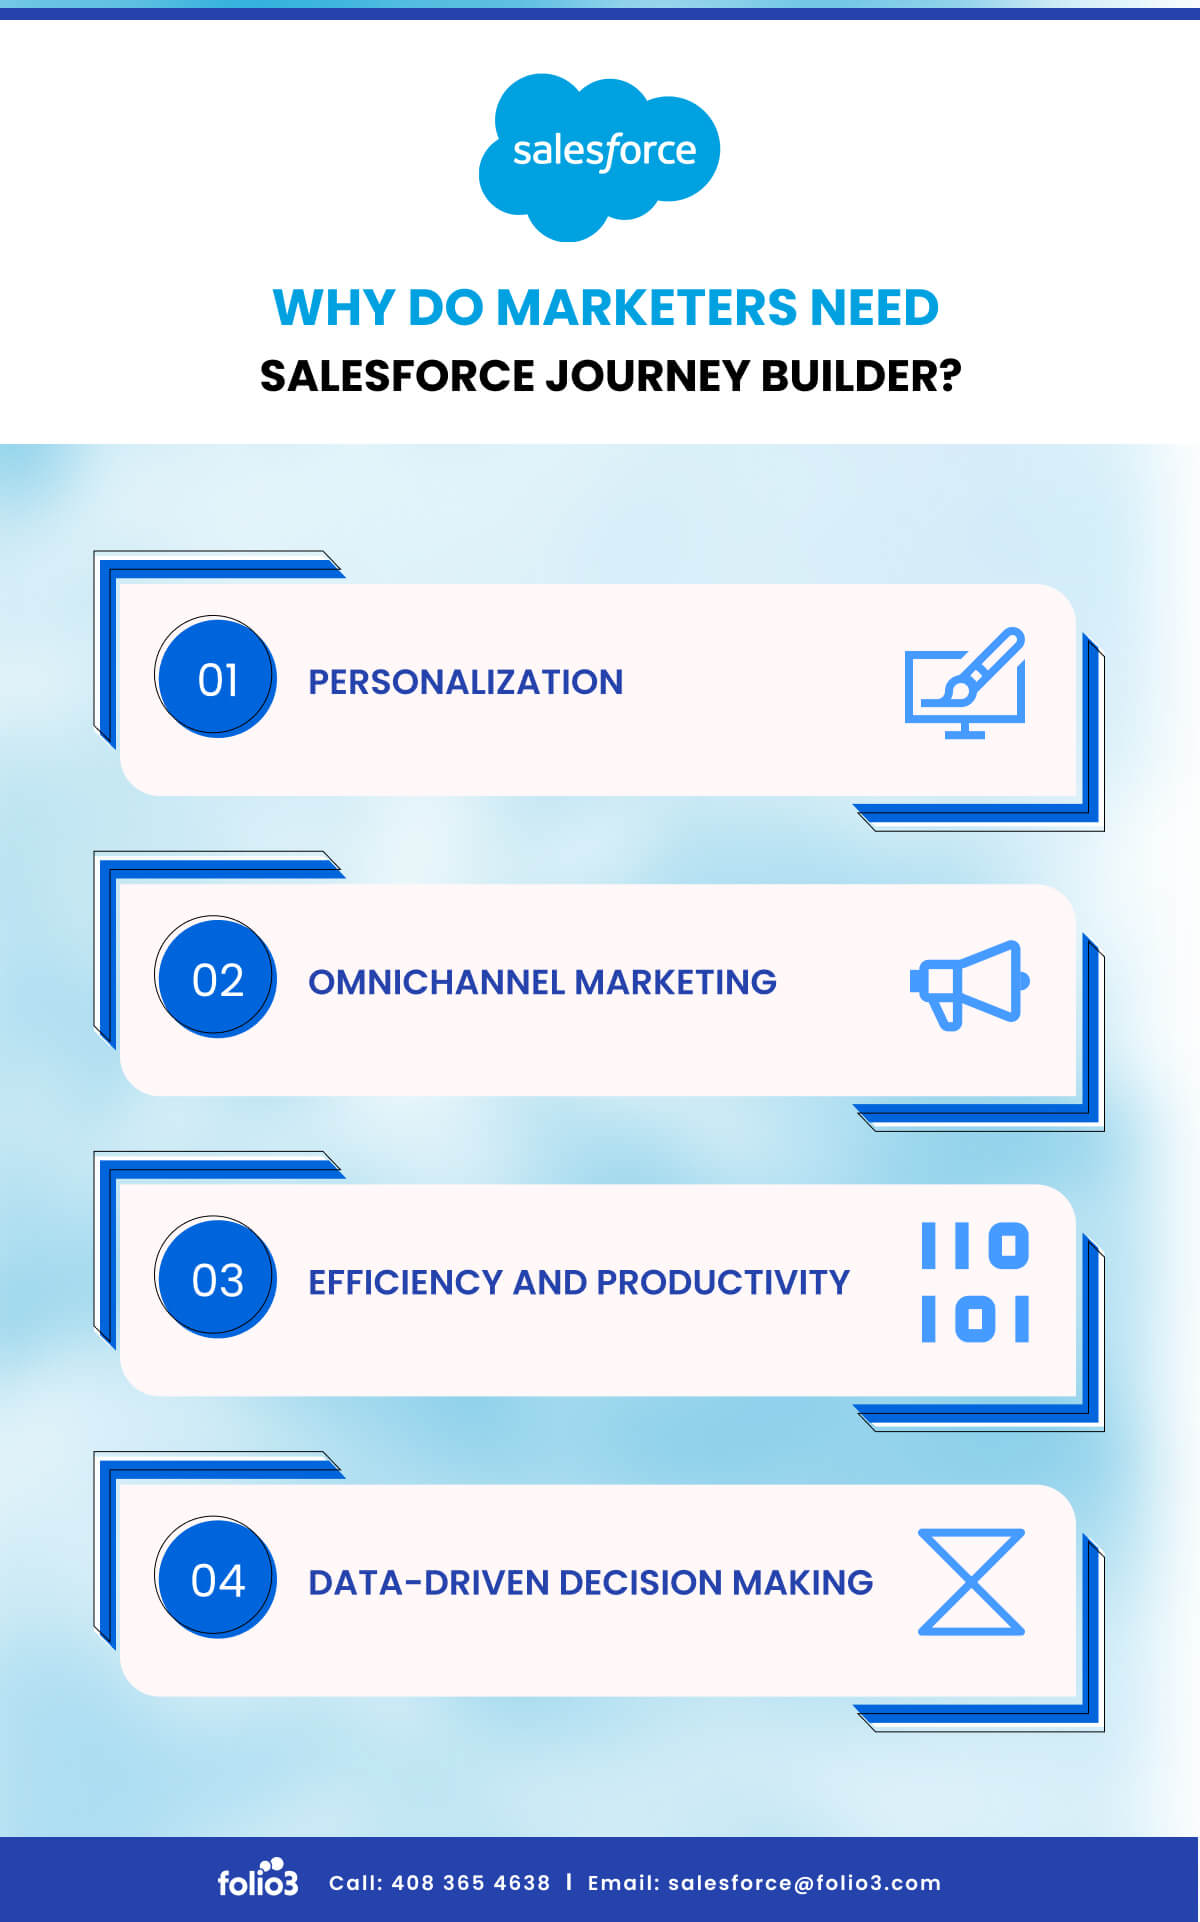 Why Do Marketers Need Salesforce Journey Builder